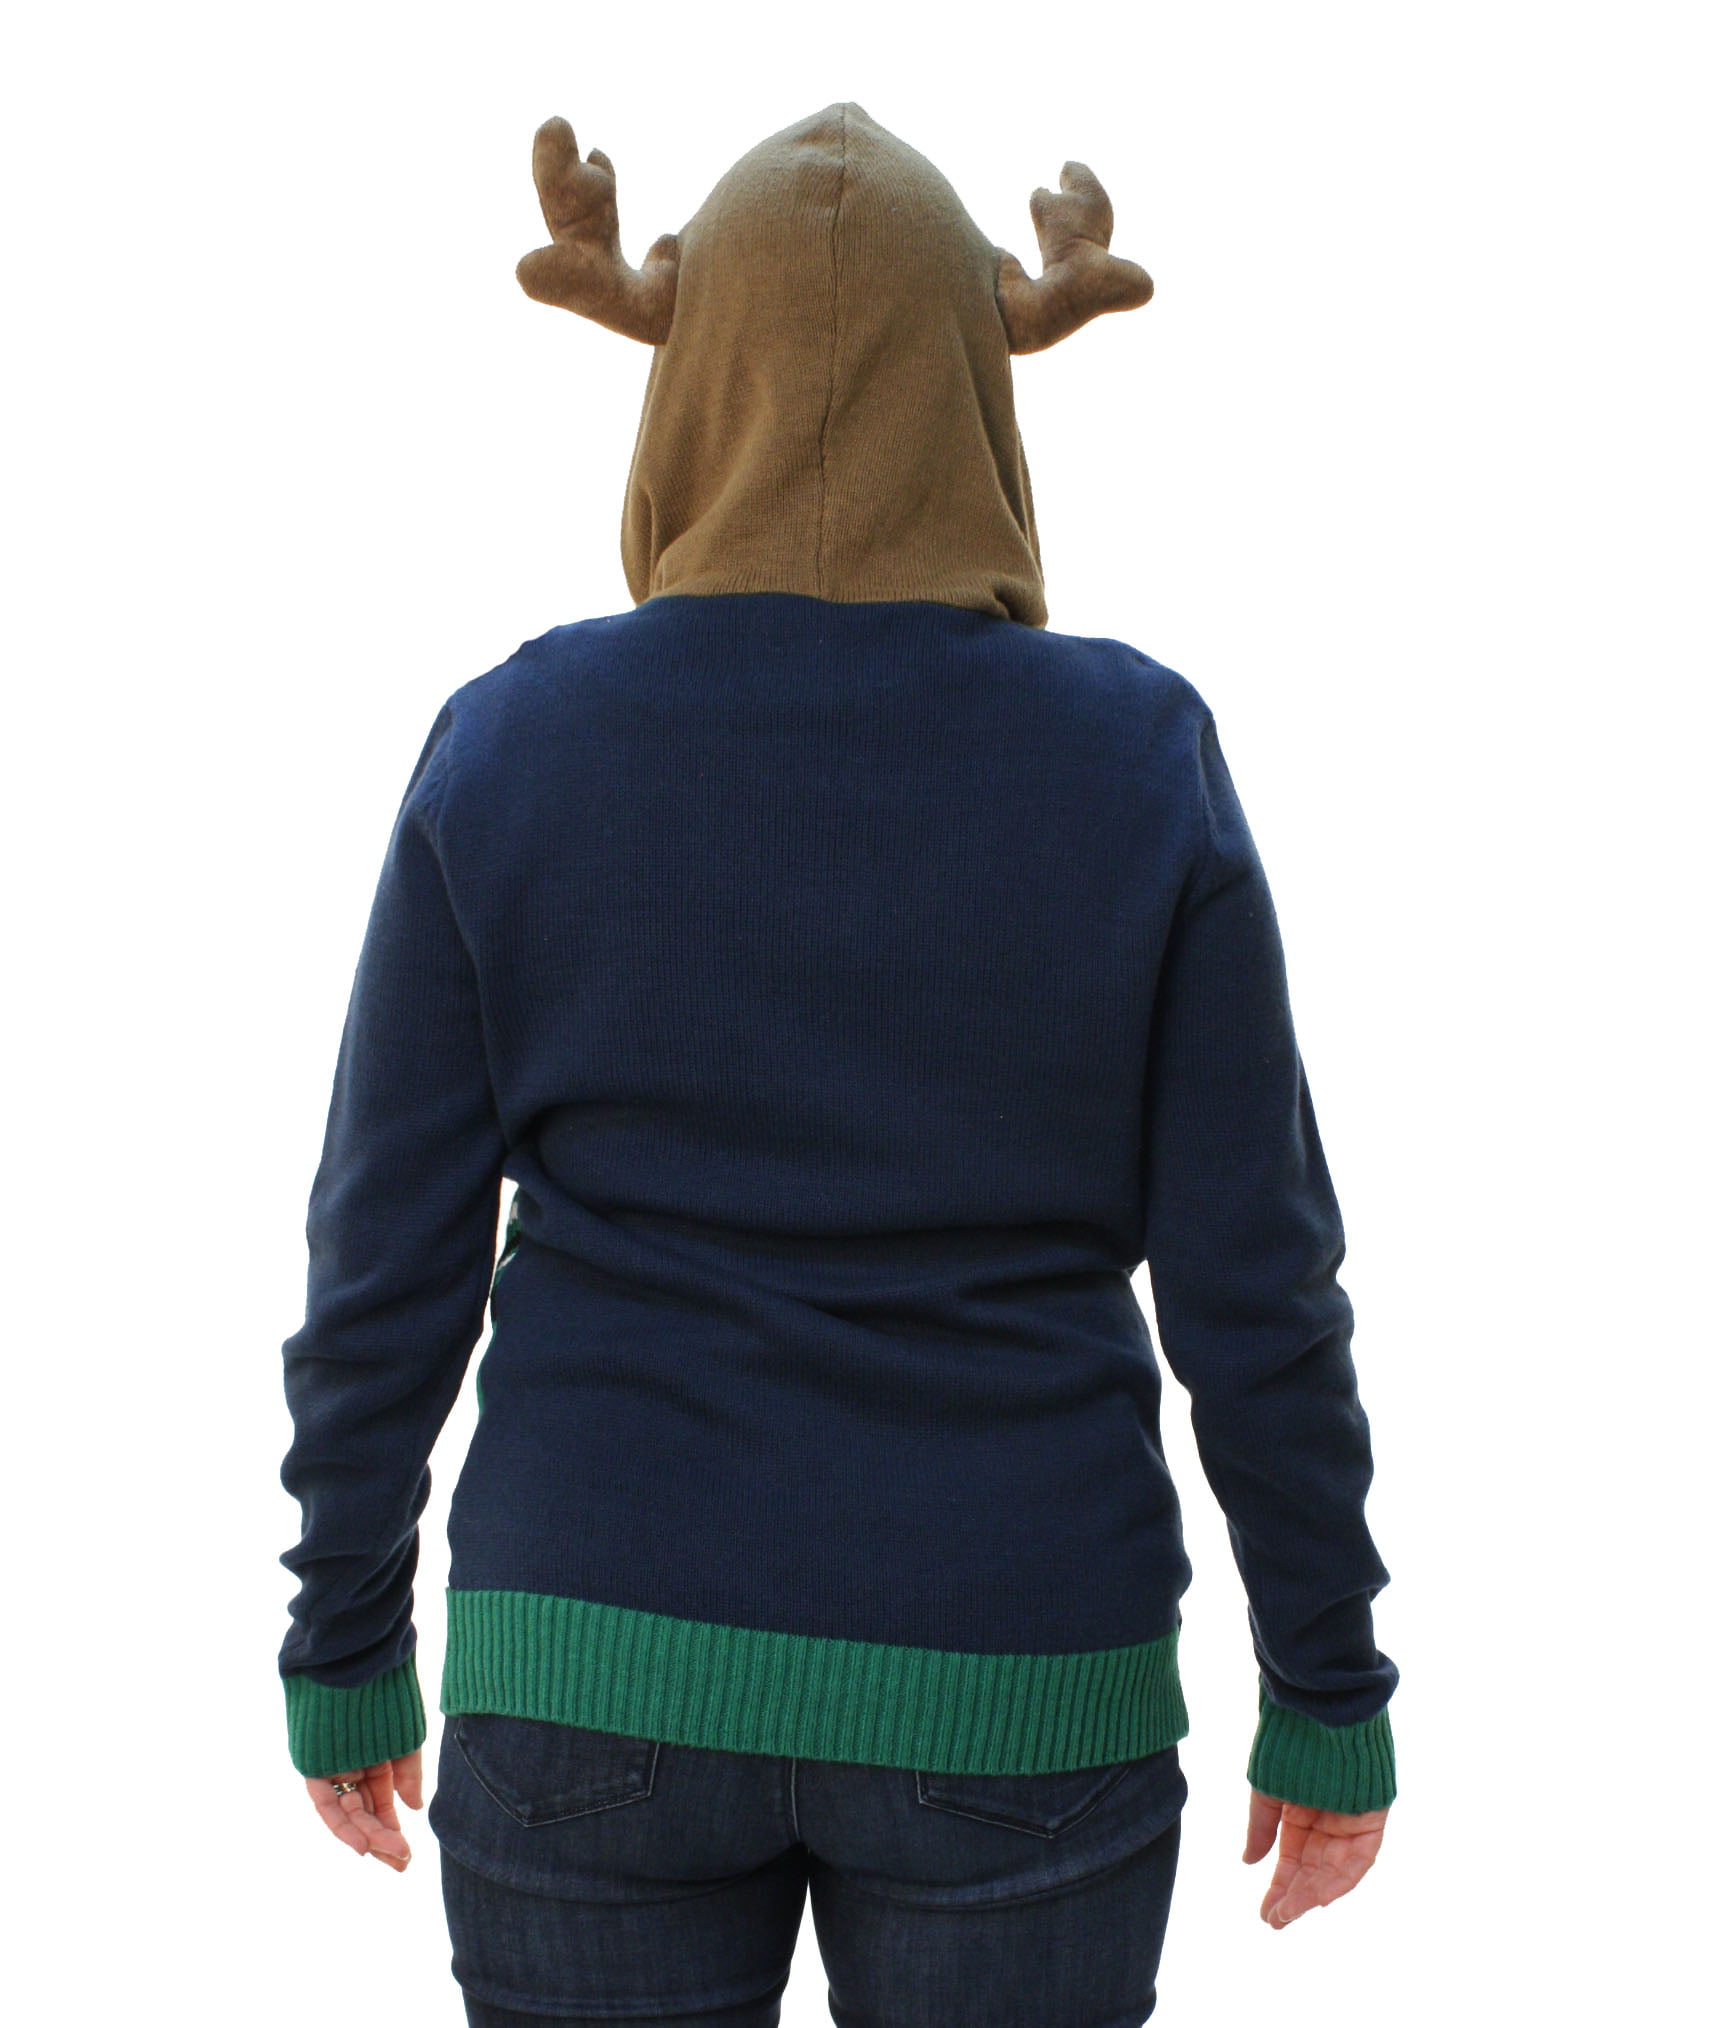 Ugly Christmas Sweater Loose Fit Women's Hooded Reindeer Sweater ...